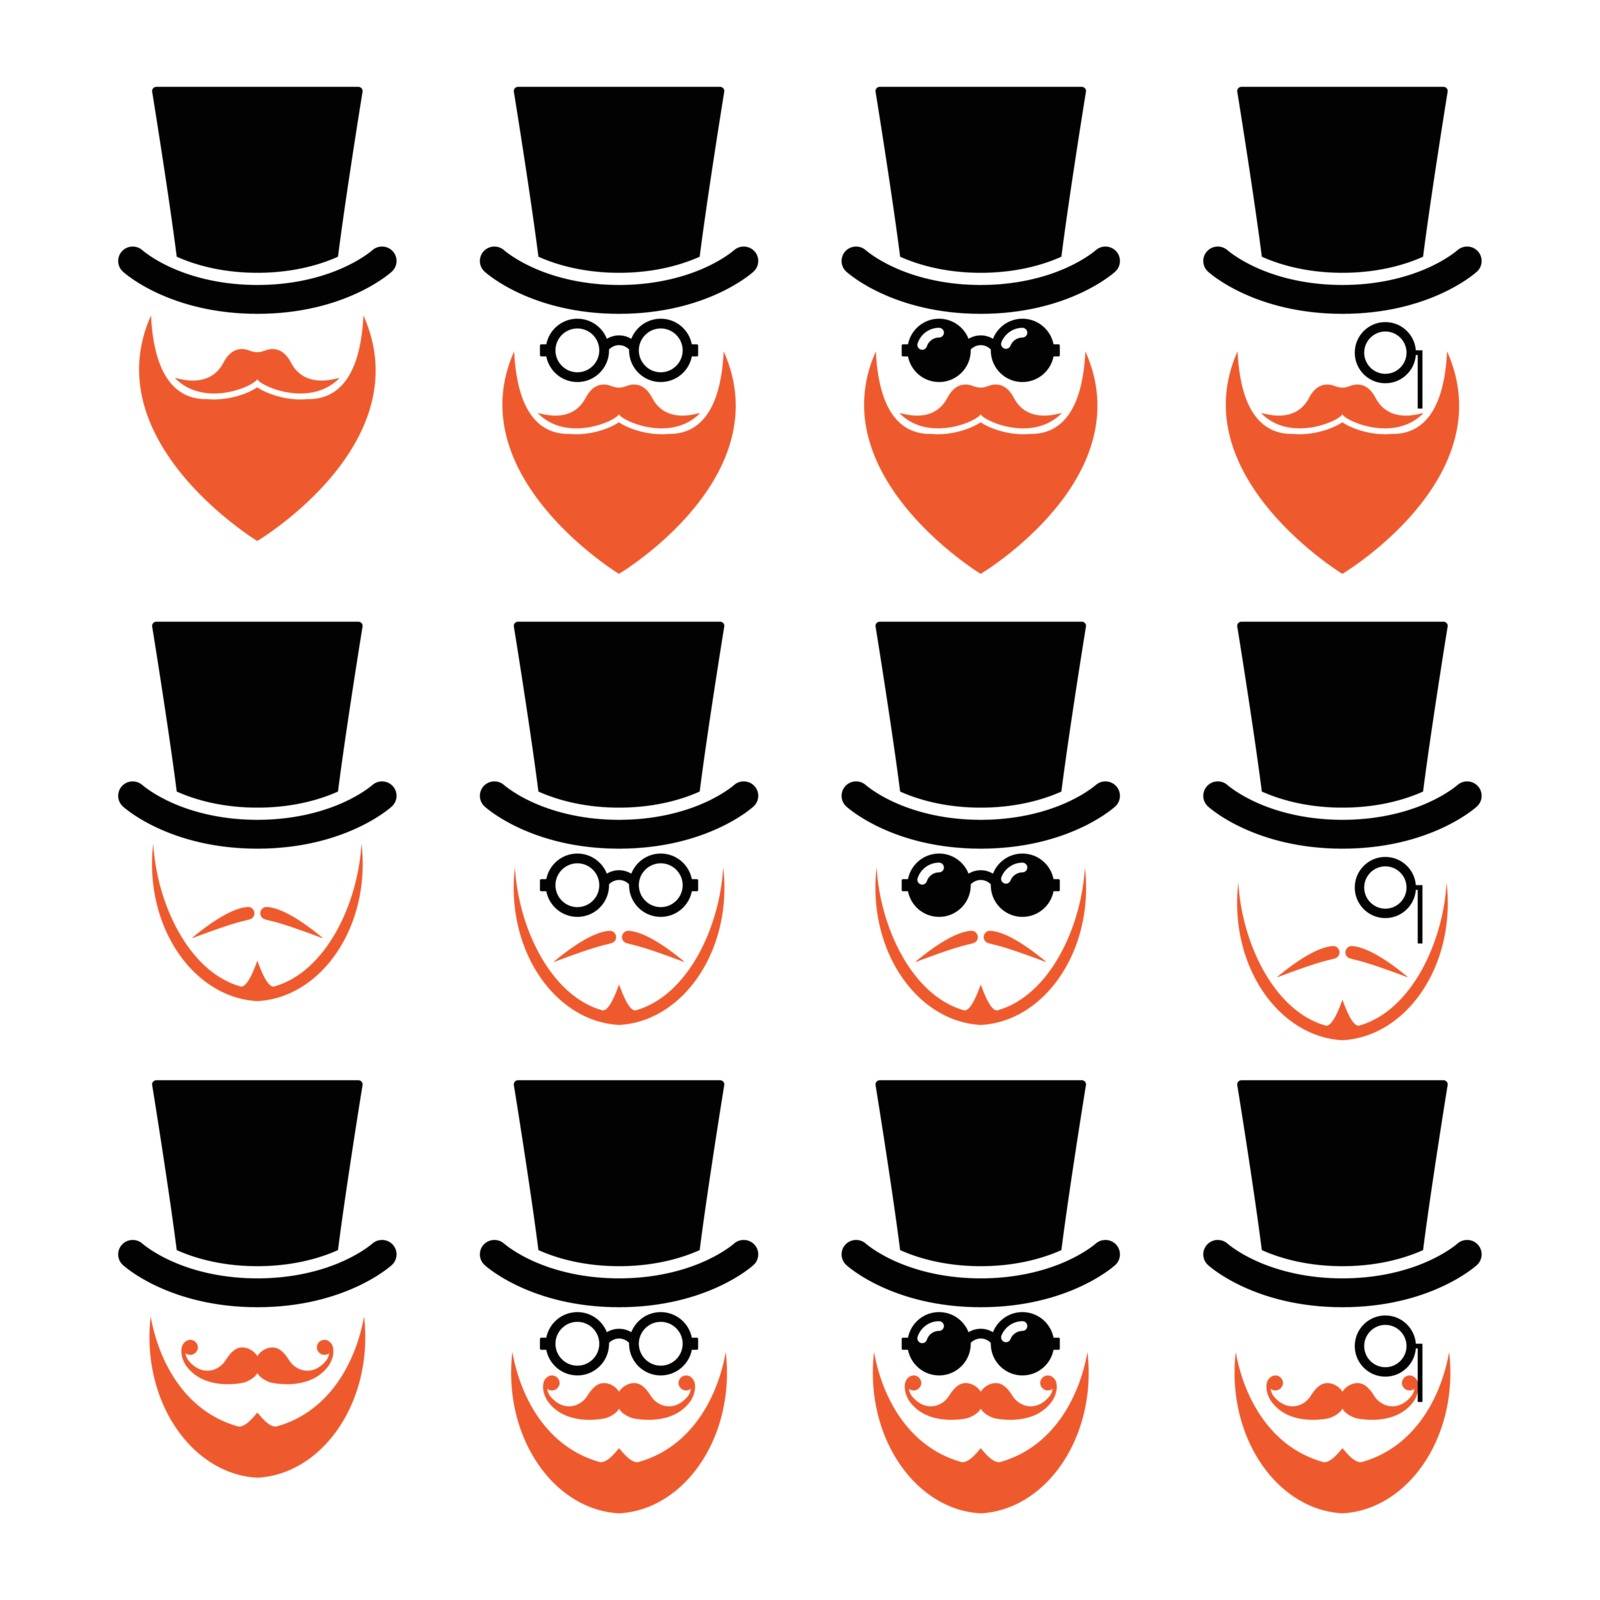 Man in hat with ginger beard and glasses icons set by RedKoala